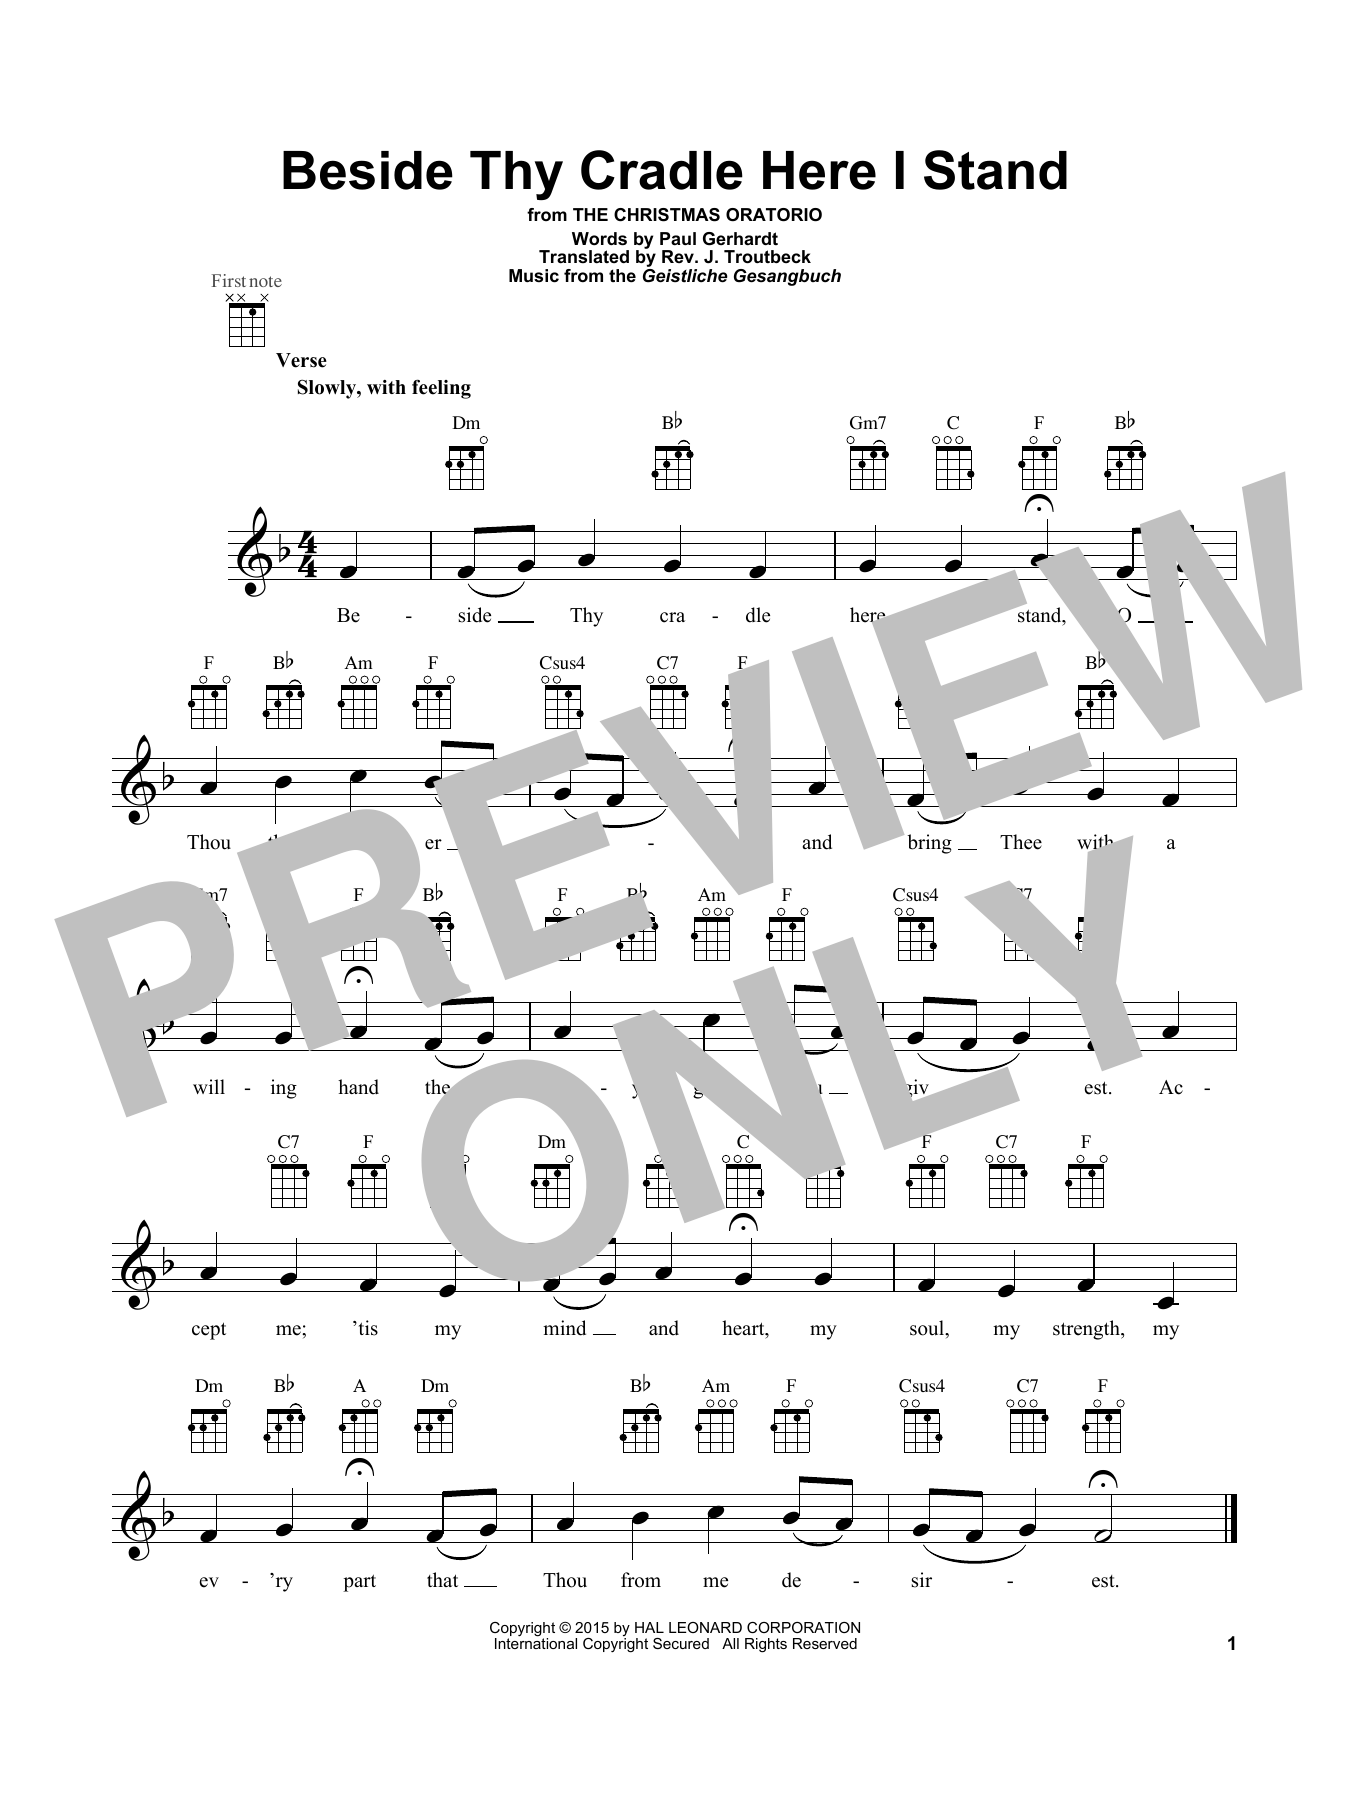 Download Rev. J. Troutbeck (trans.) Beside Thy Cradle Here I Stand Sheet Music